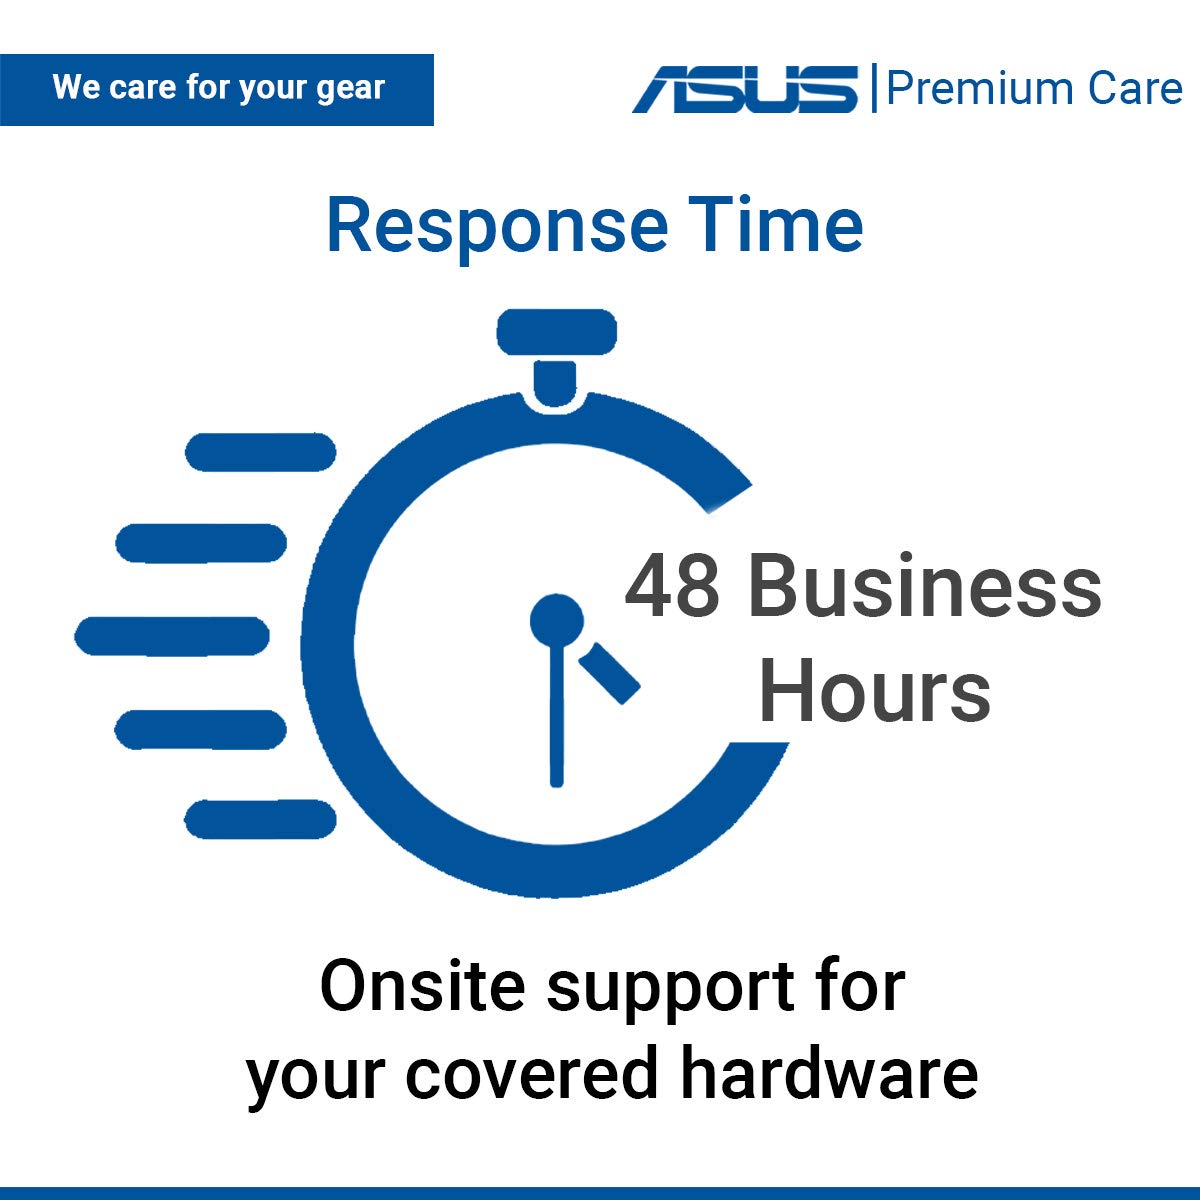 ASUS Premium Care 2 Year Extended Warranty & 3 Year Accidental Damage Protection Pack with Onsite Service for Chromebook Vivobook Zenbook Series Laptops